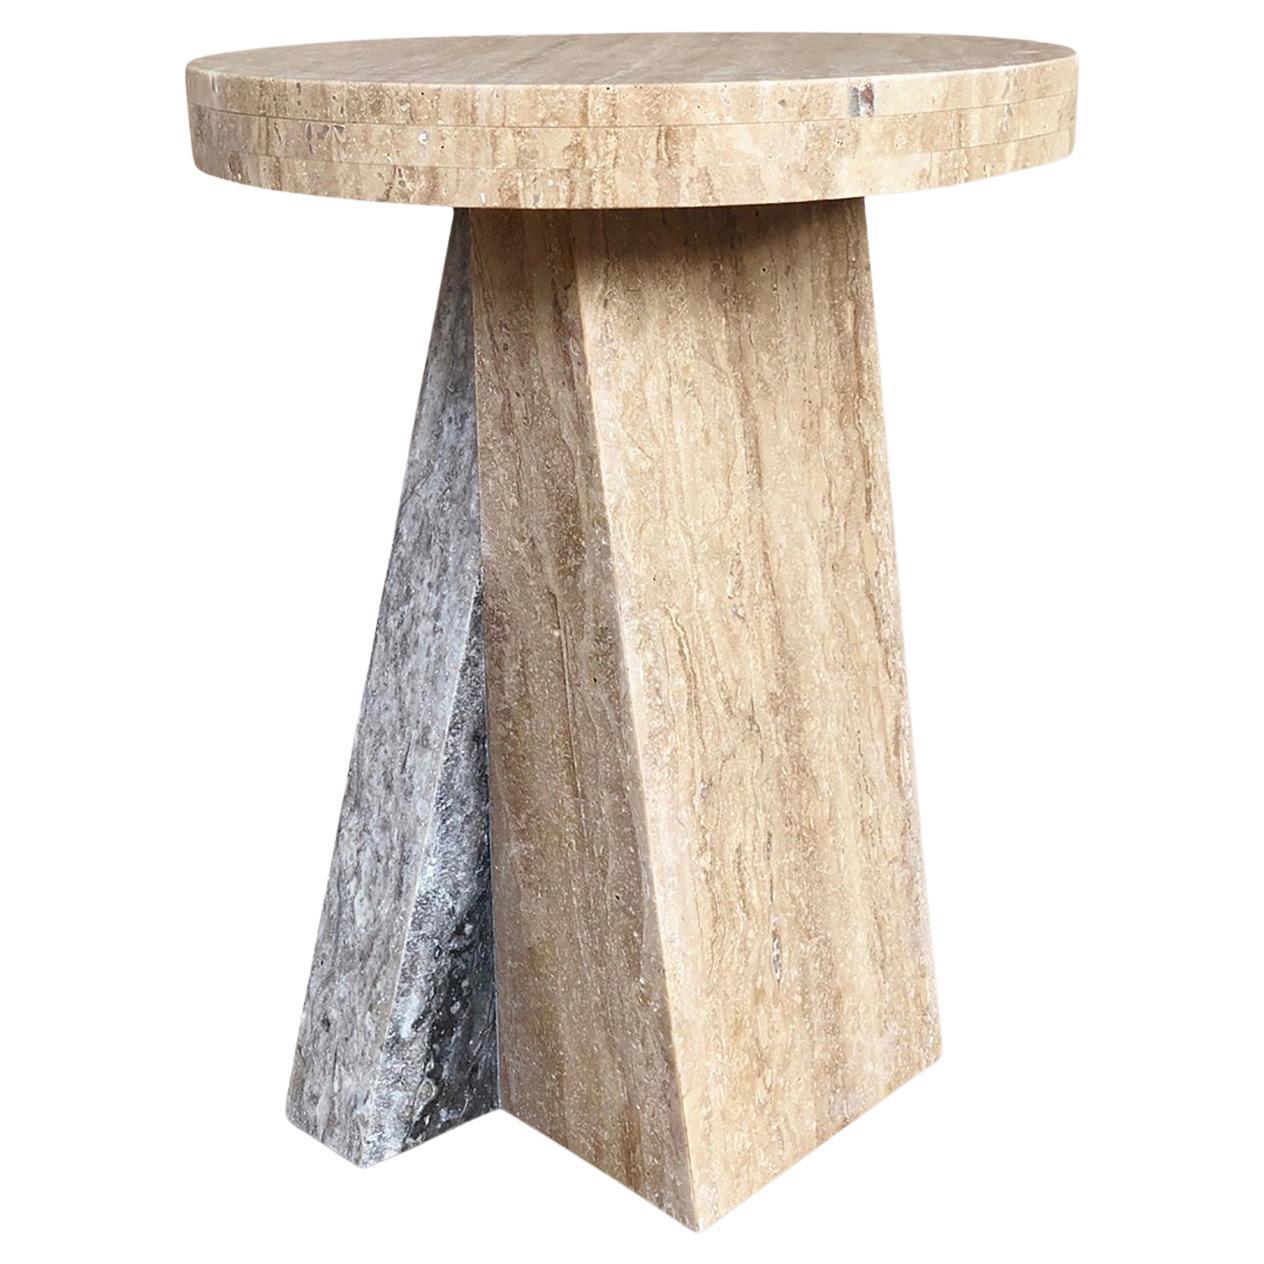 "Borel" Mixed Marble and Travertine Side Table by Christiane Lemieux For Sale